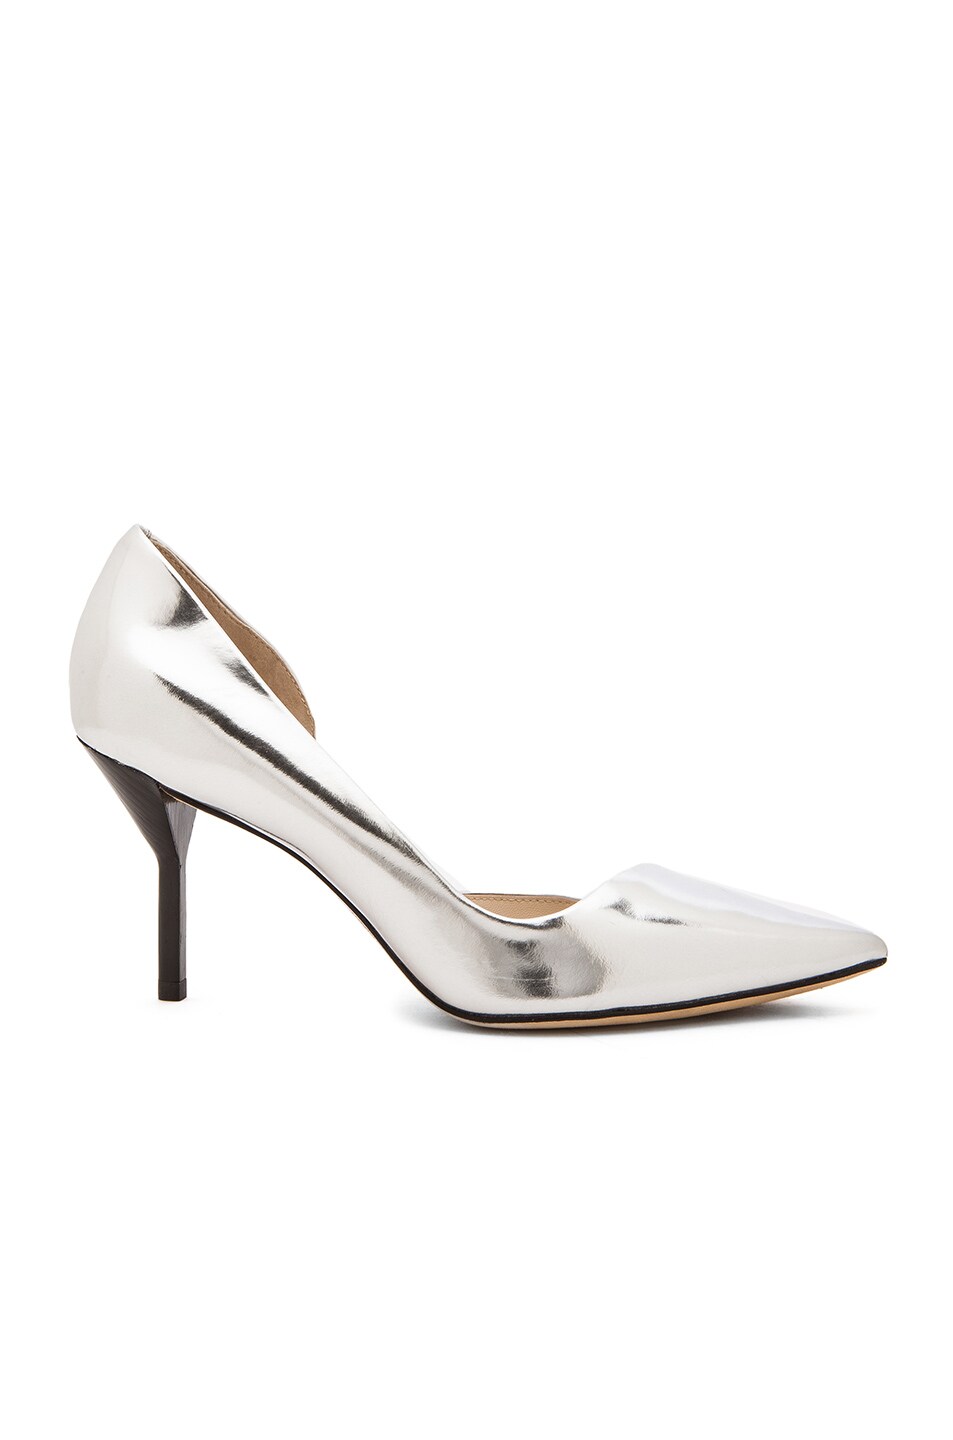 Image 1 of 3.1 phillip lim Martini Leather Pumps in Silver